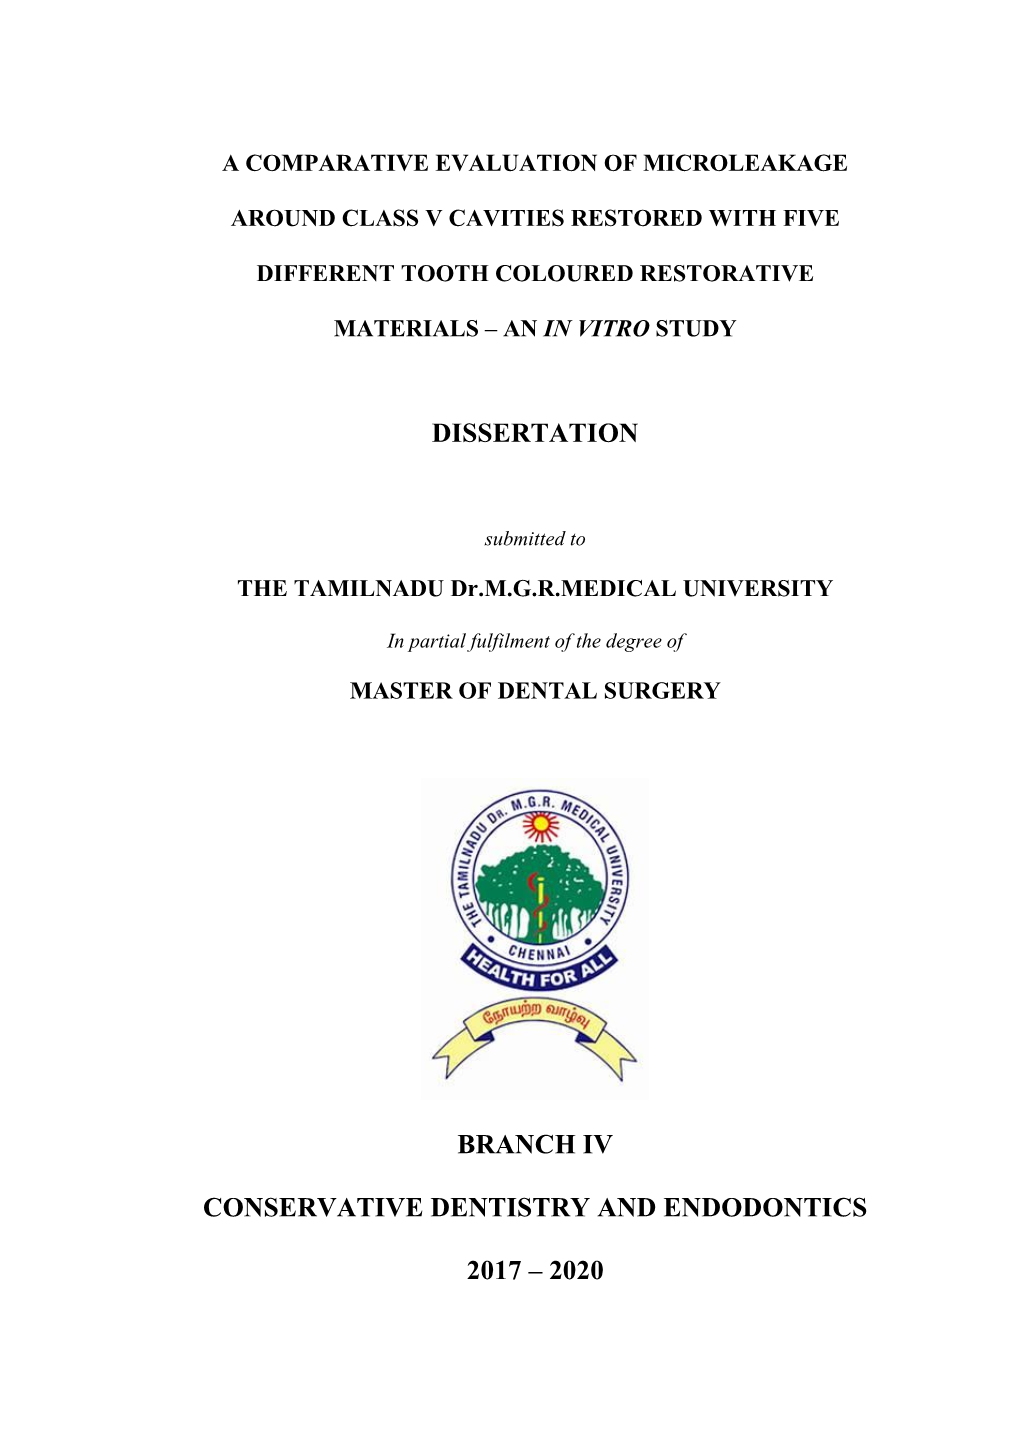 Dissertation Branch Iv Conservative Dentistry And